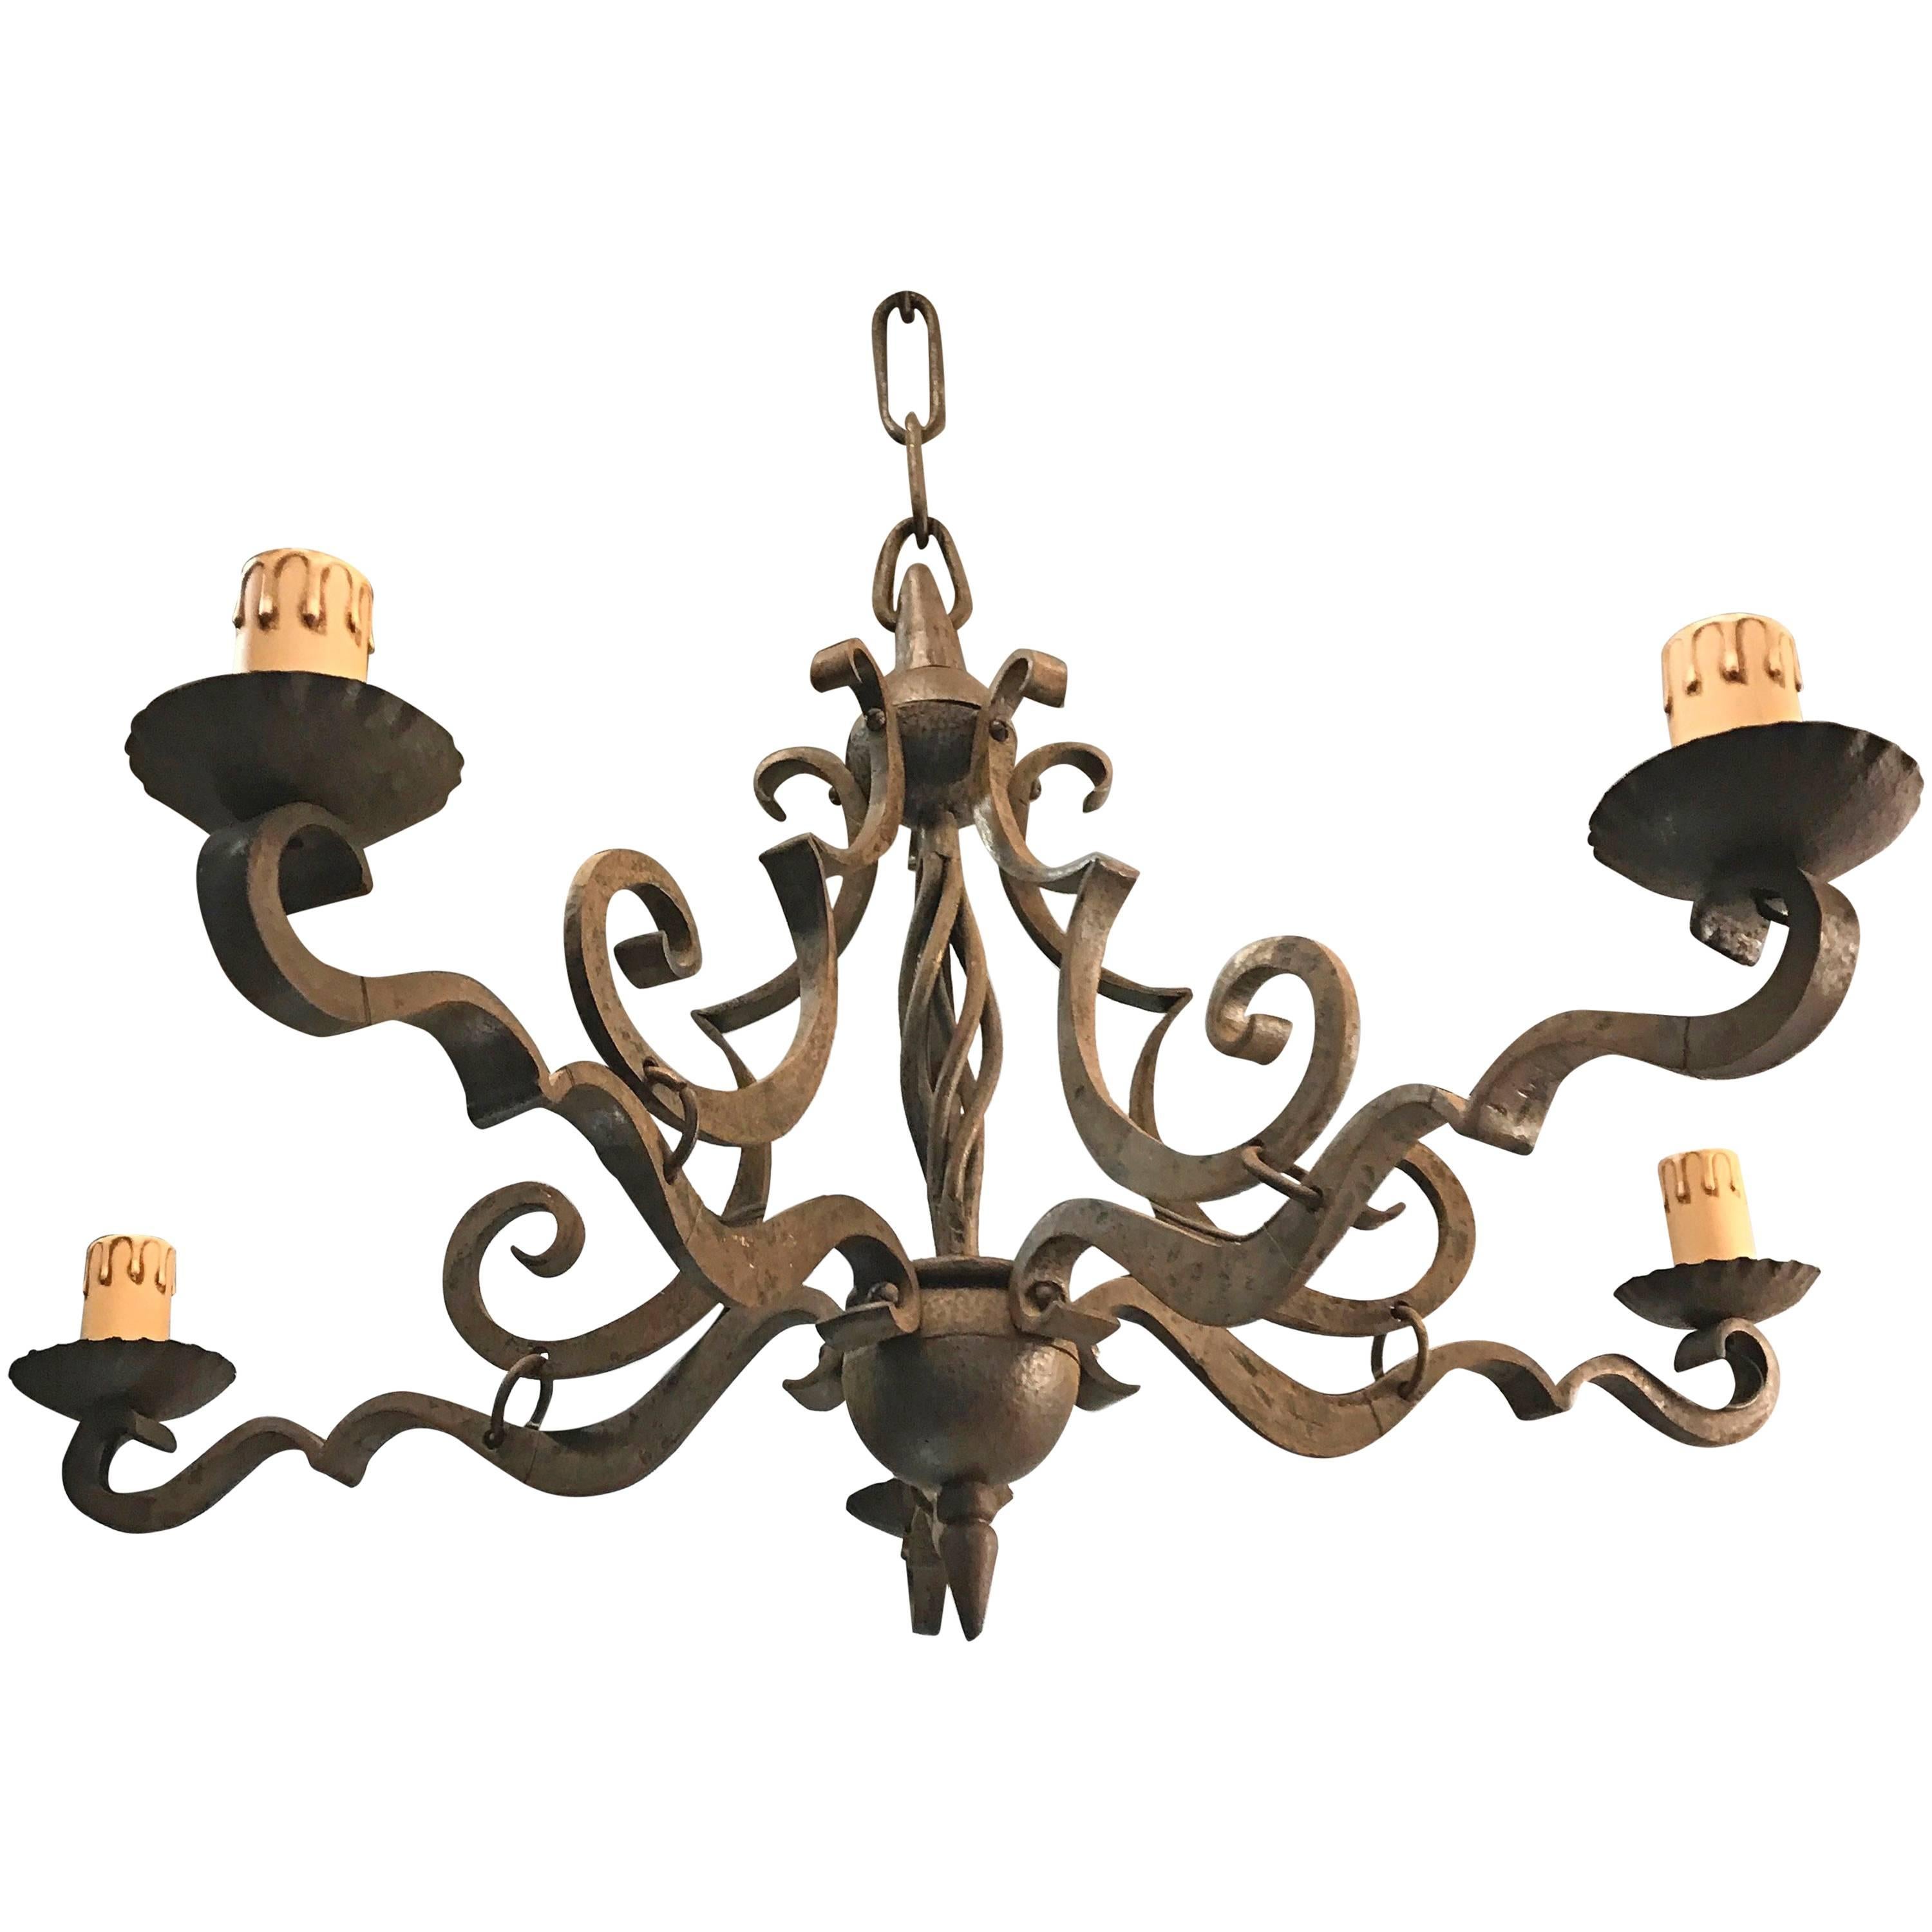 Early 1900 Arts & Crafts Hand-Forged Wrought Iron Quality Pendant  / Chandelier